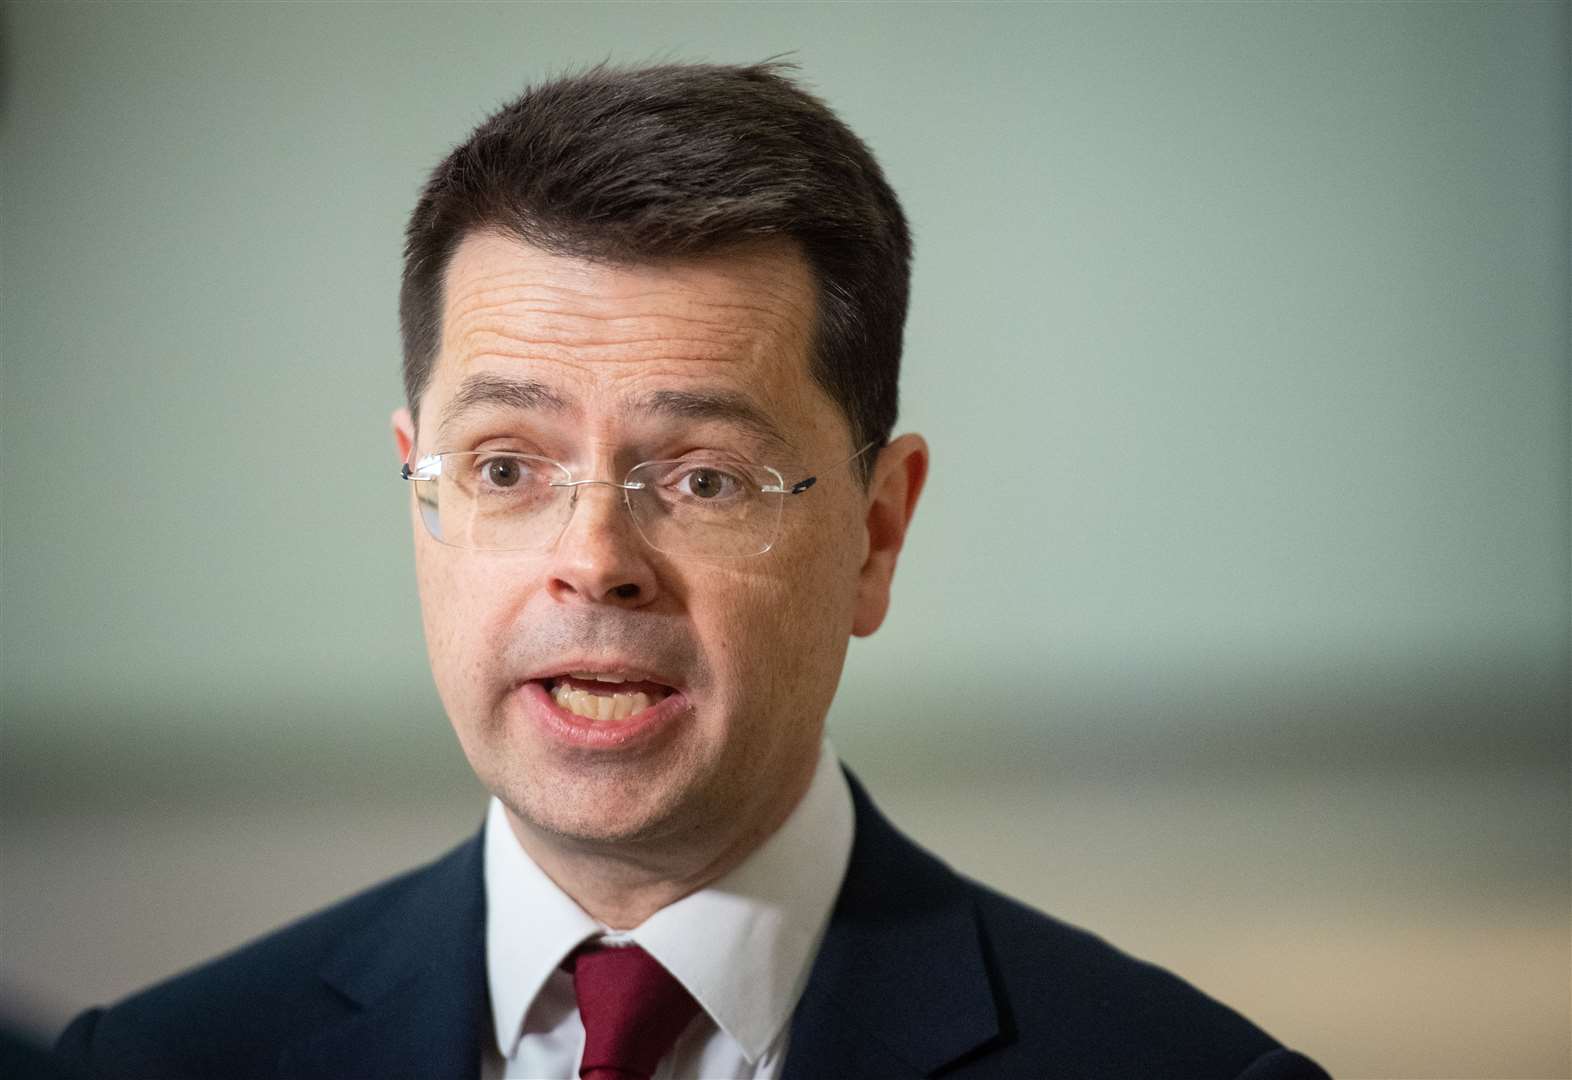 Tory MP James Brokenshire died of lung cancer on October 7 at the age of 53 (PA)